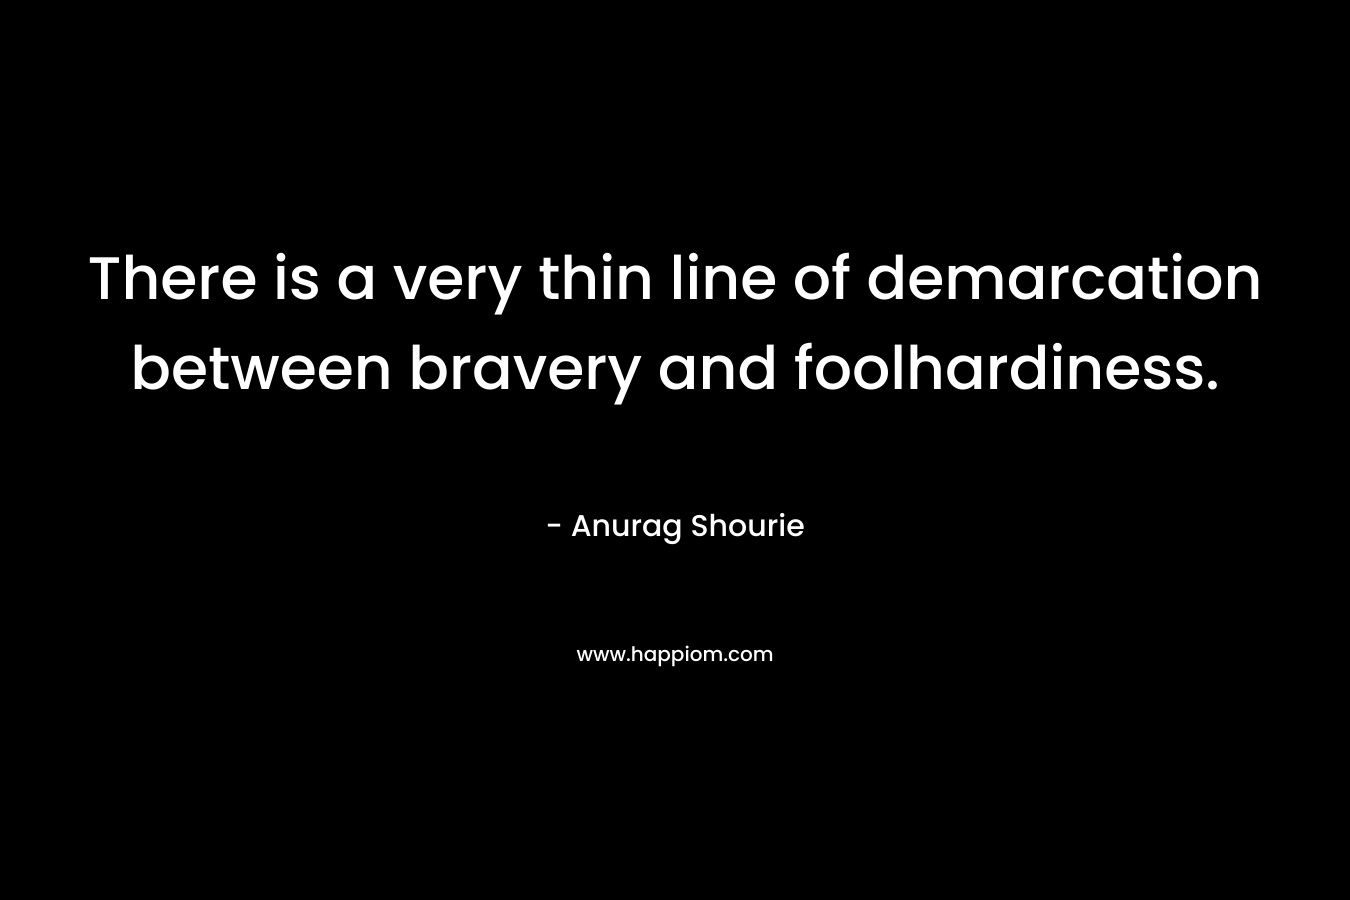 There is a very thin line of demarcation between bravery and foolhardiness.